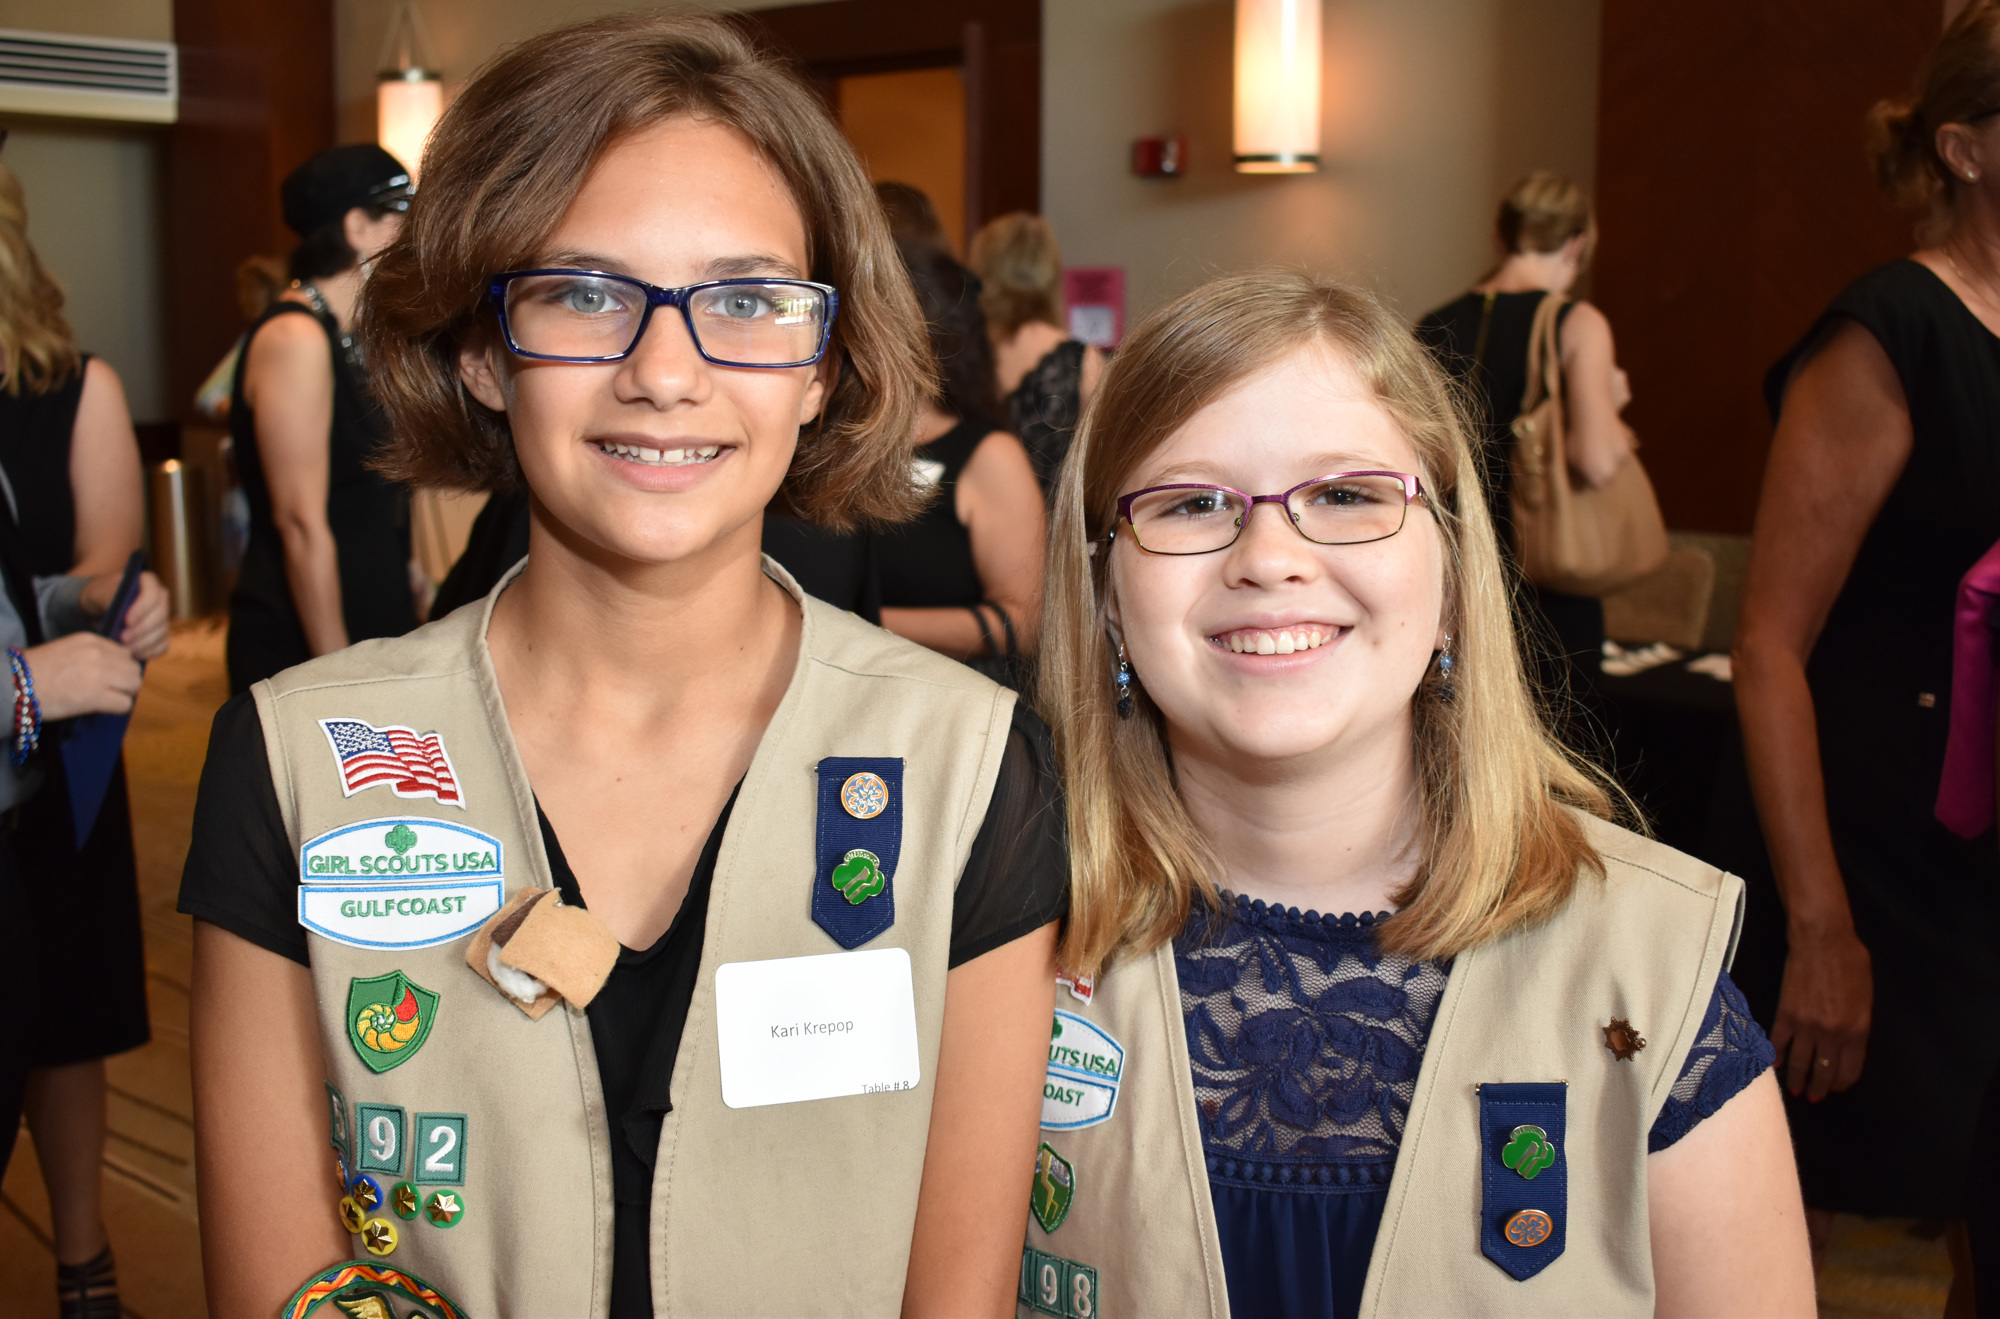 Kari Krepop, a member of Girl Scout Troop #592, and Allison Carchio, a member of Girl Scout Troop #198, were among the scout members who participated in the Salute the Runway fashion show July 13 at Hyatt Regency Sarasota.